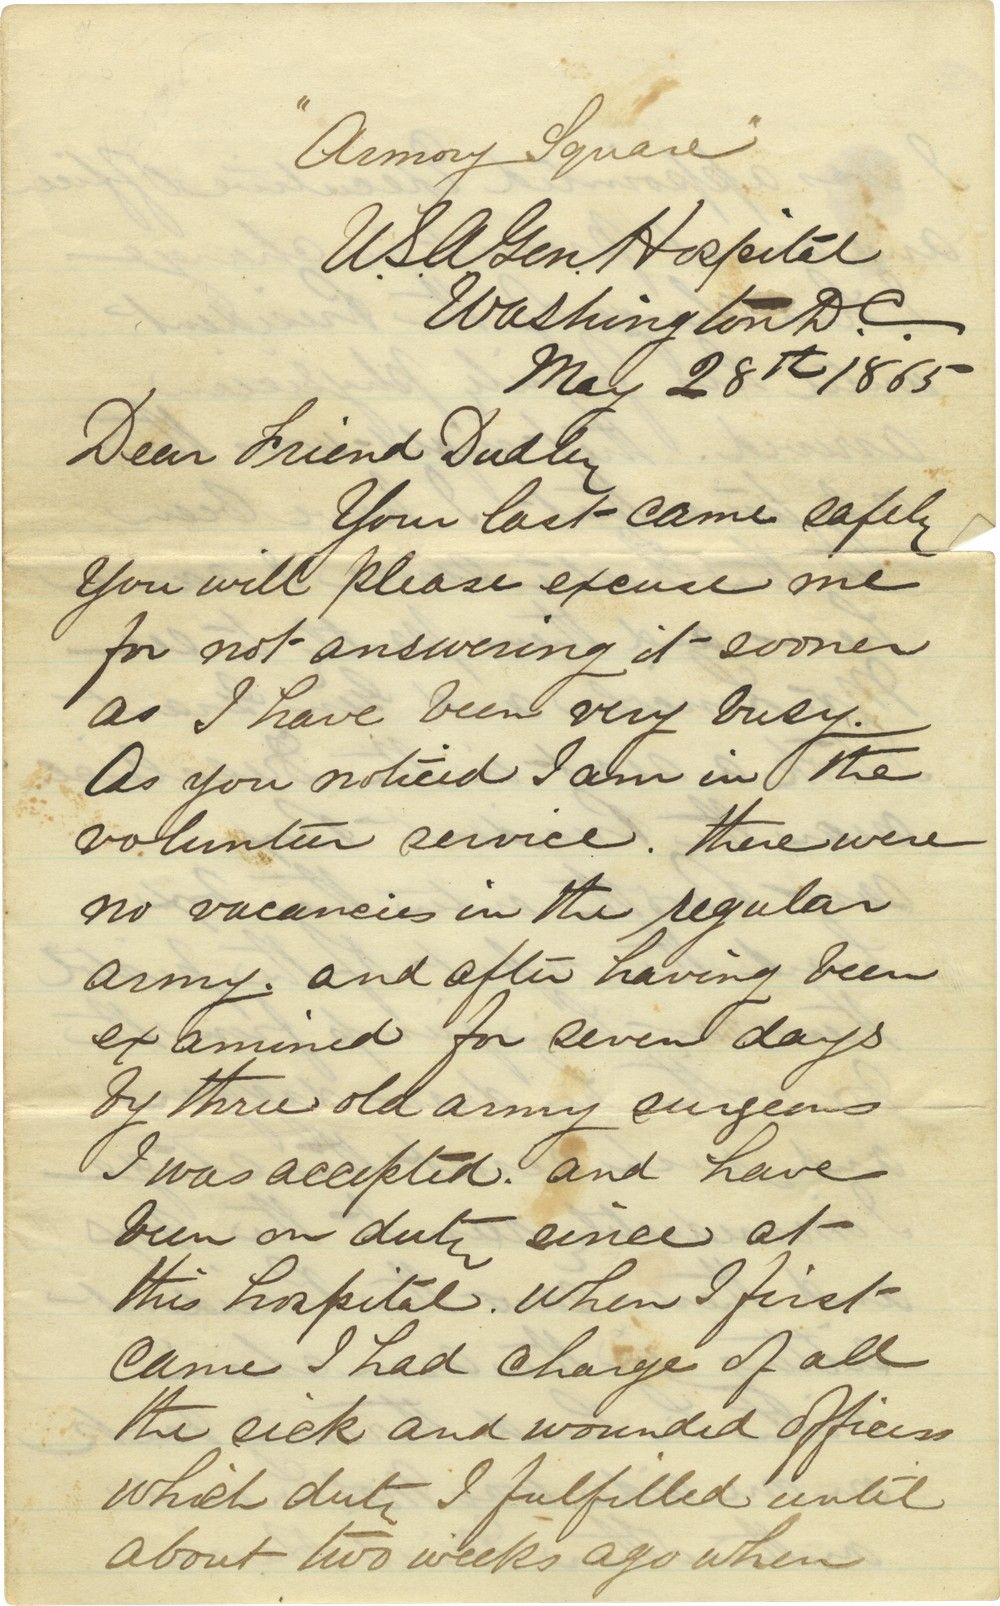 The Eyewitness Account of Abraham Lincoln's Assassination by the Physician Who Treated Him at the Scene